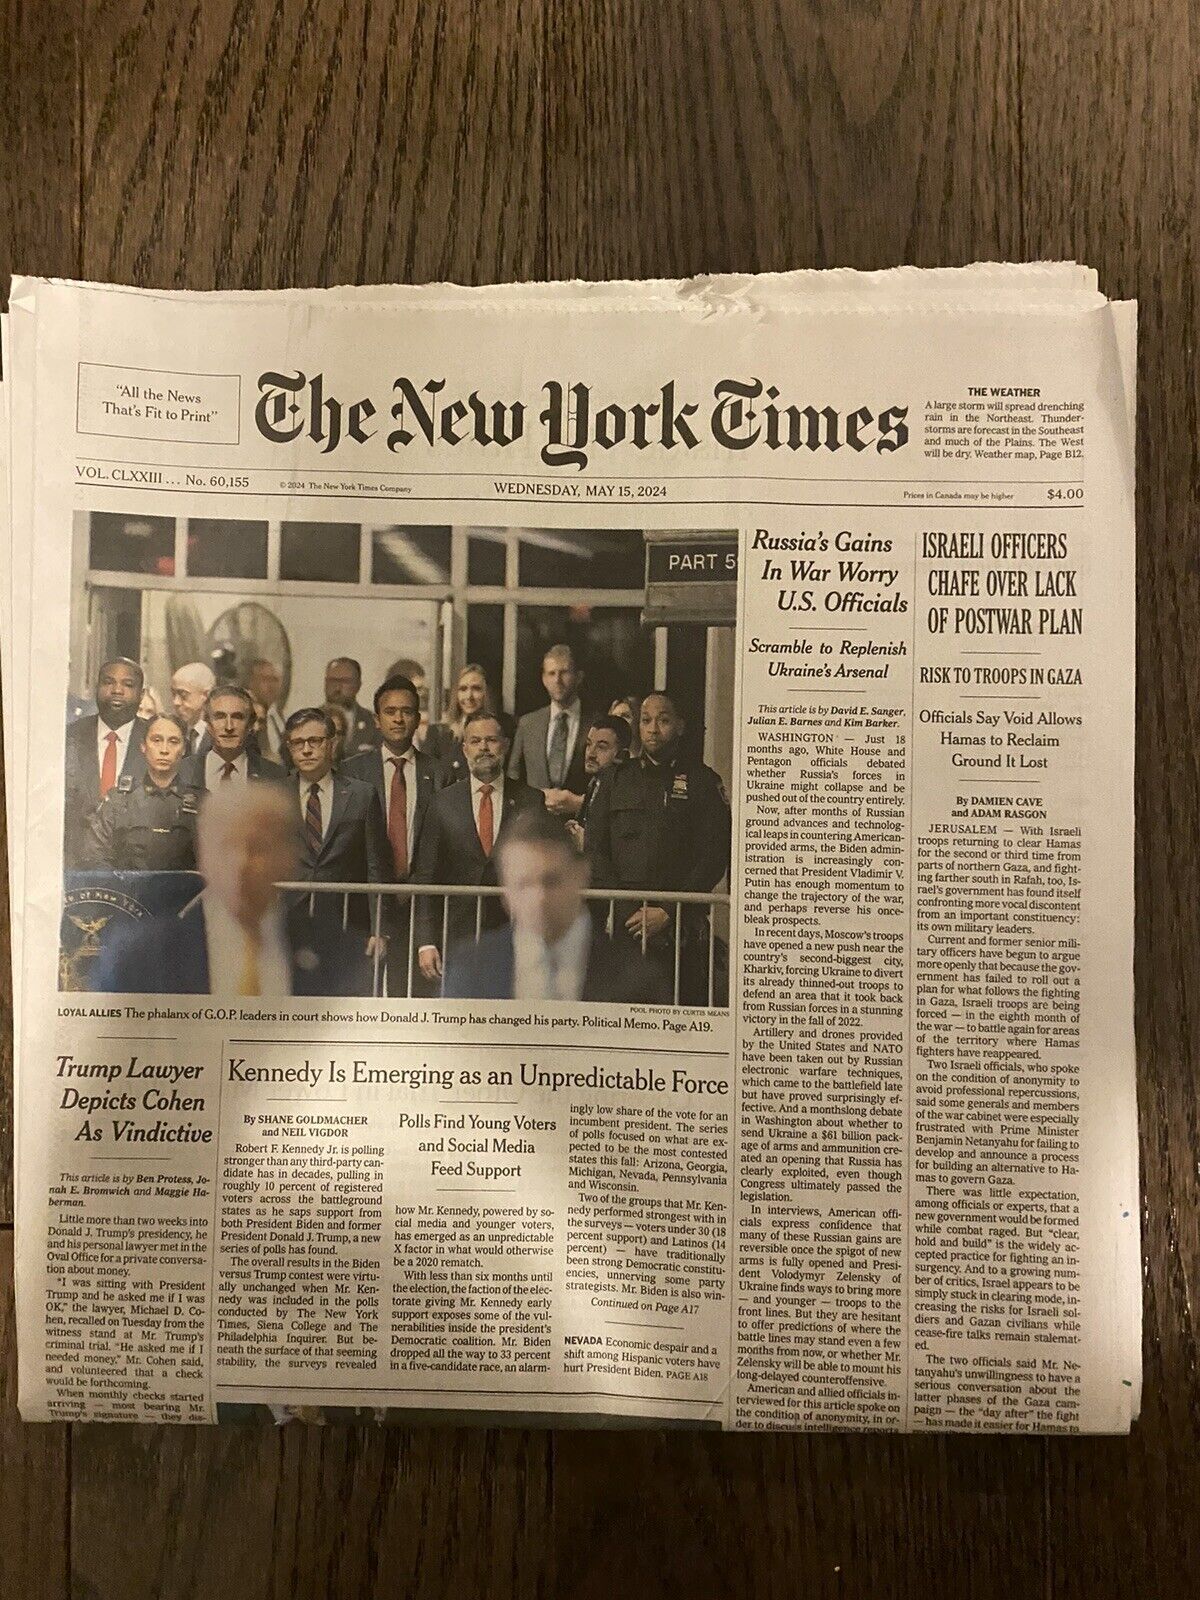 The New York Times Wednesday, May 15, 2024 Complete Print Newspaper (NEW)